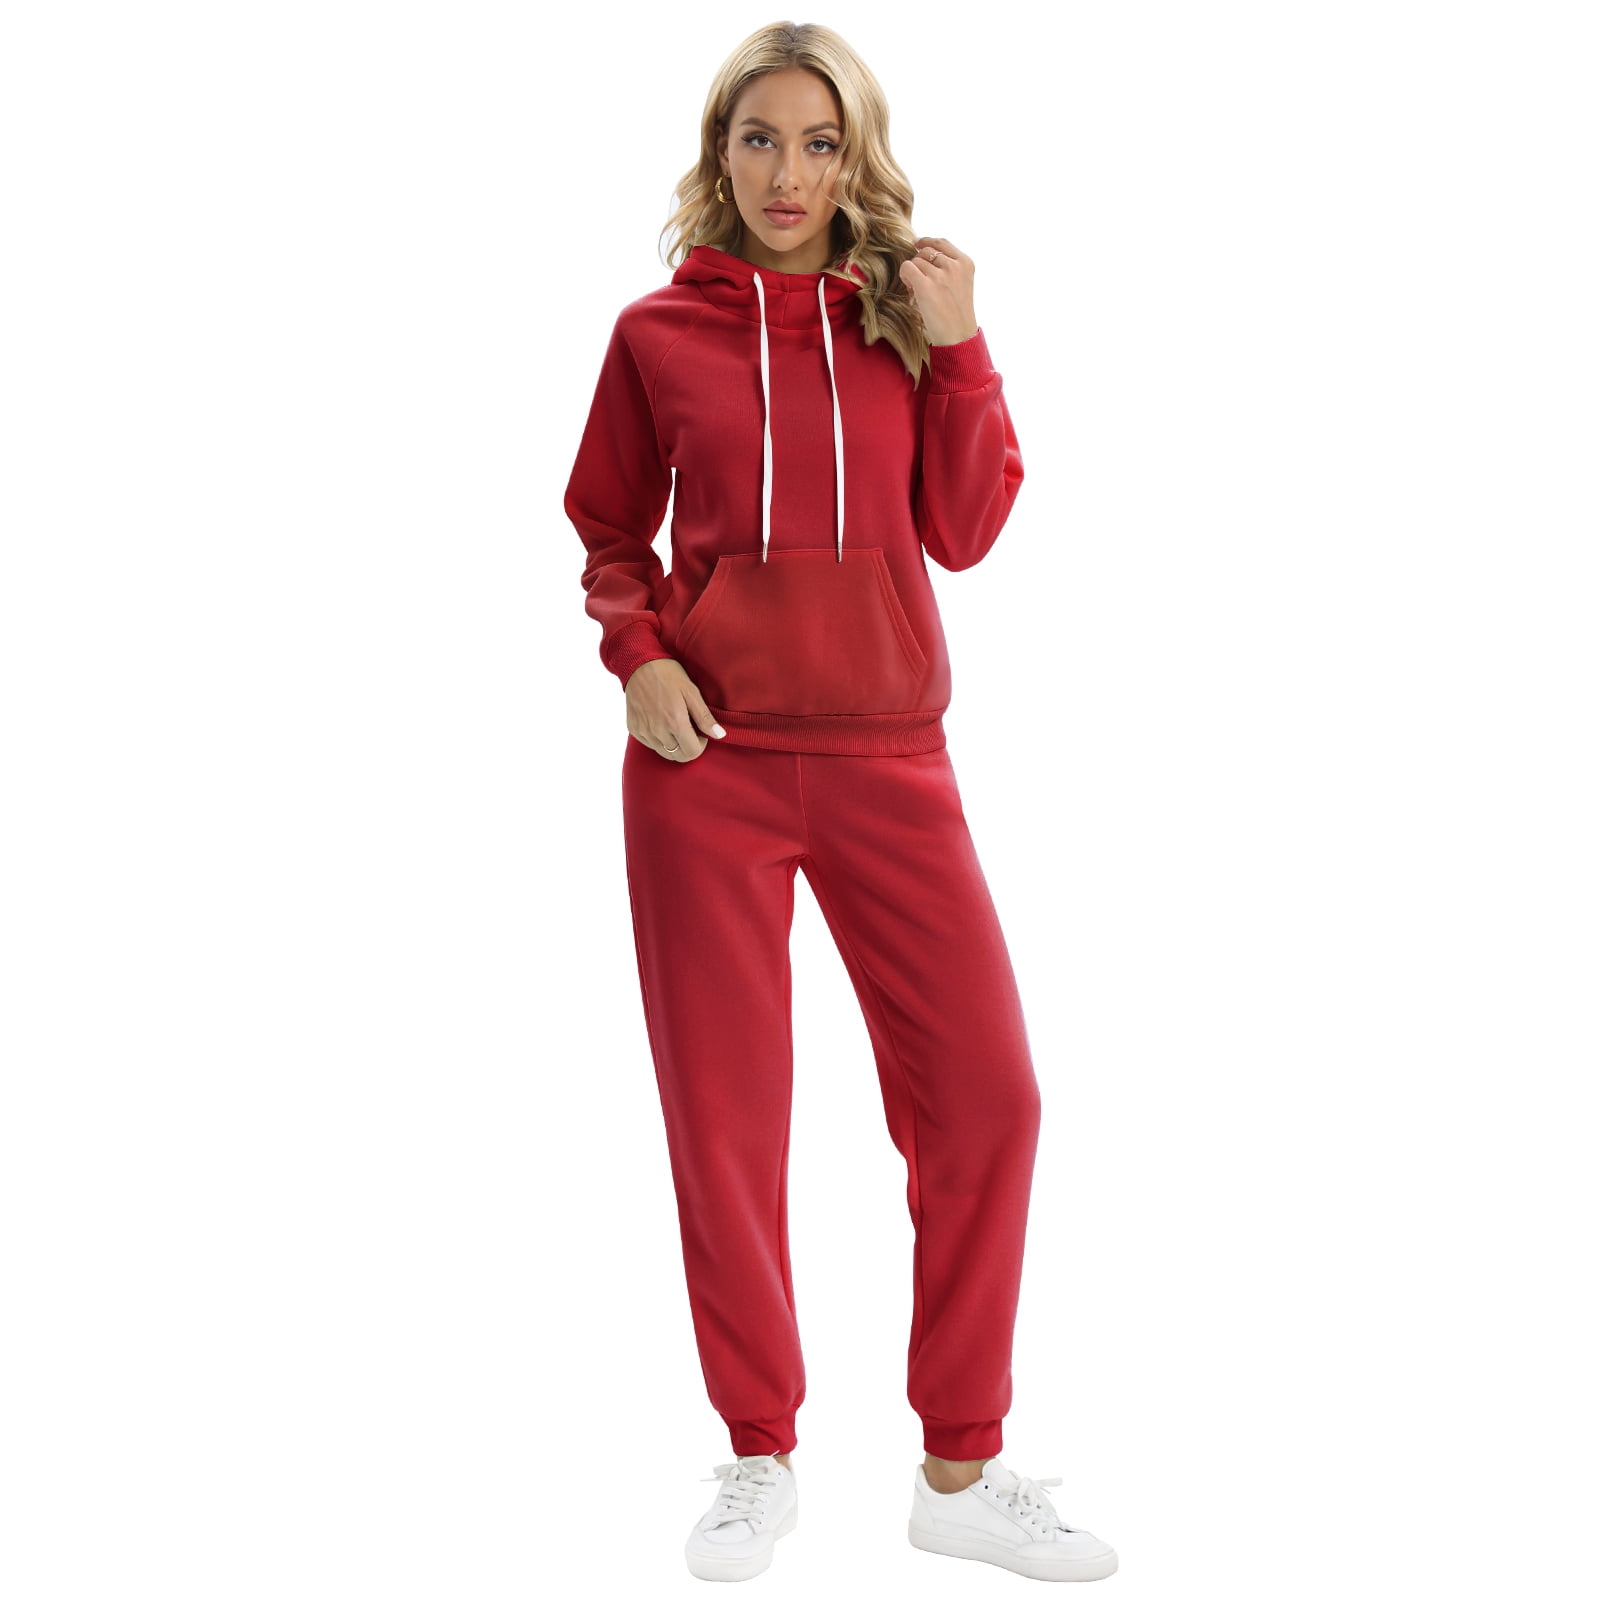 Women's Casual Athleisure Matching Sweatsuit Polar Fleece Quarter Zip  Thermal Lined Pullover Sweatshirt And Beam Feet Pants Set In DEEP RED